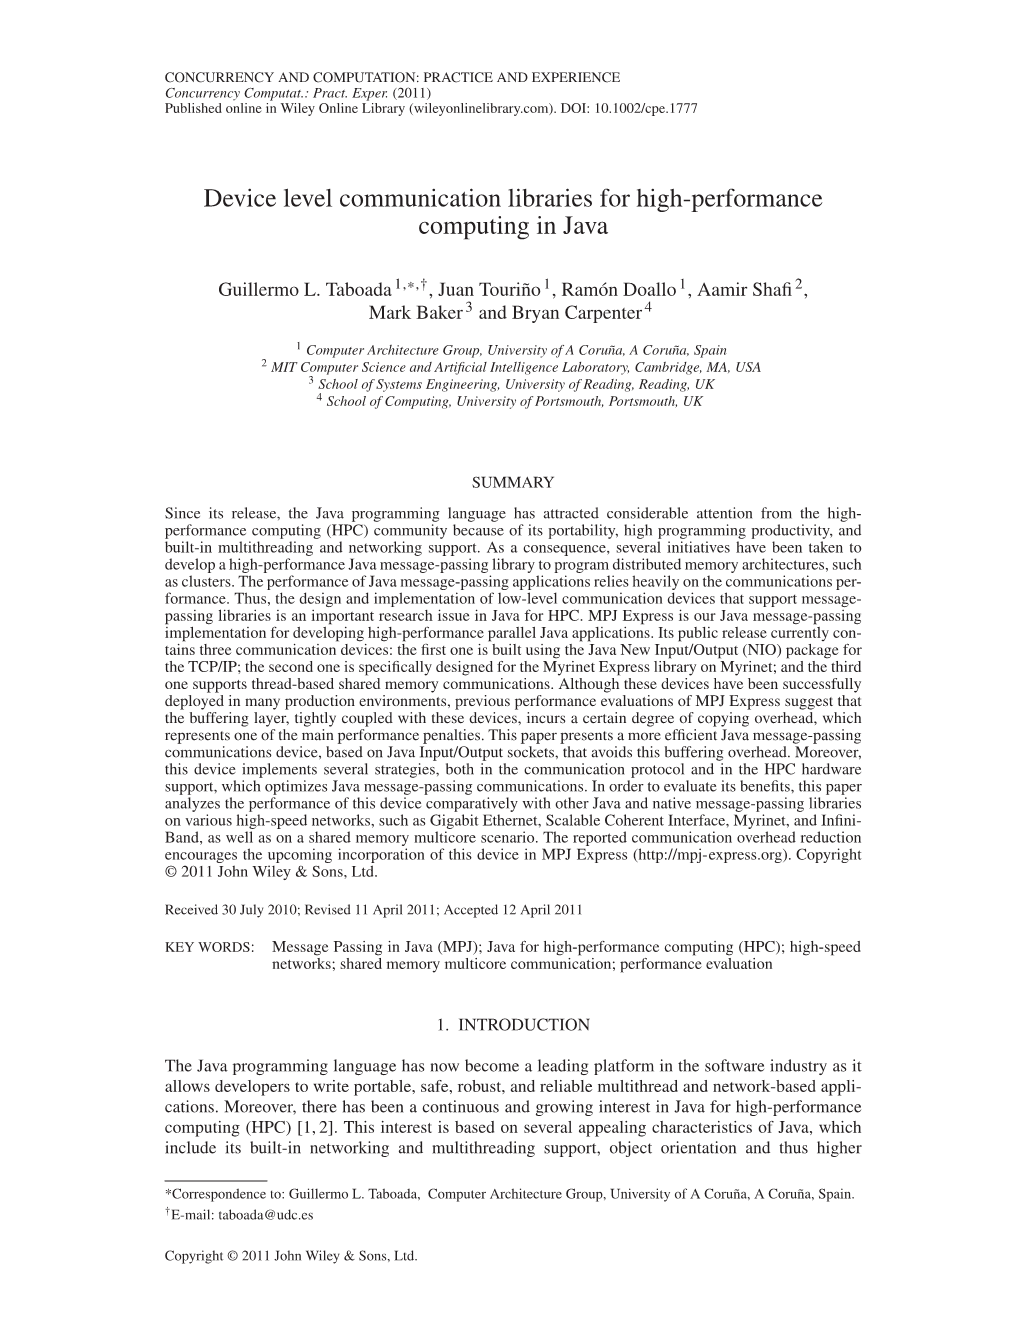 Device Level Communication Libraries for High-Performance Computing in Java